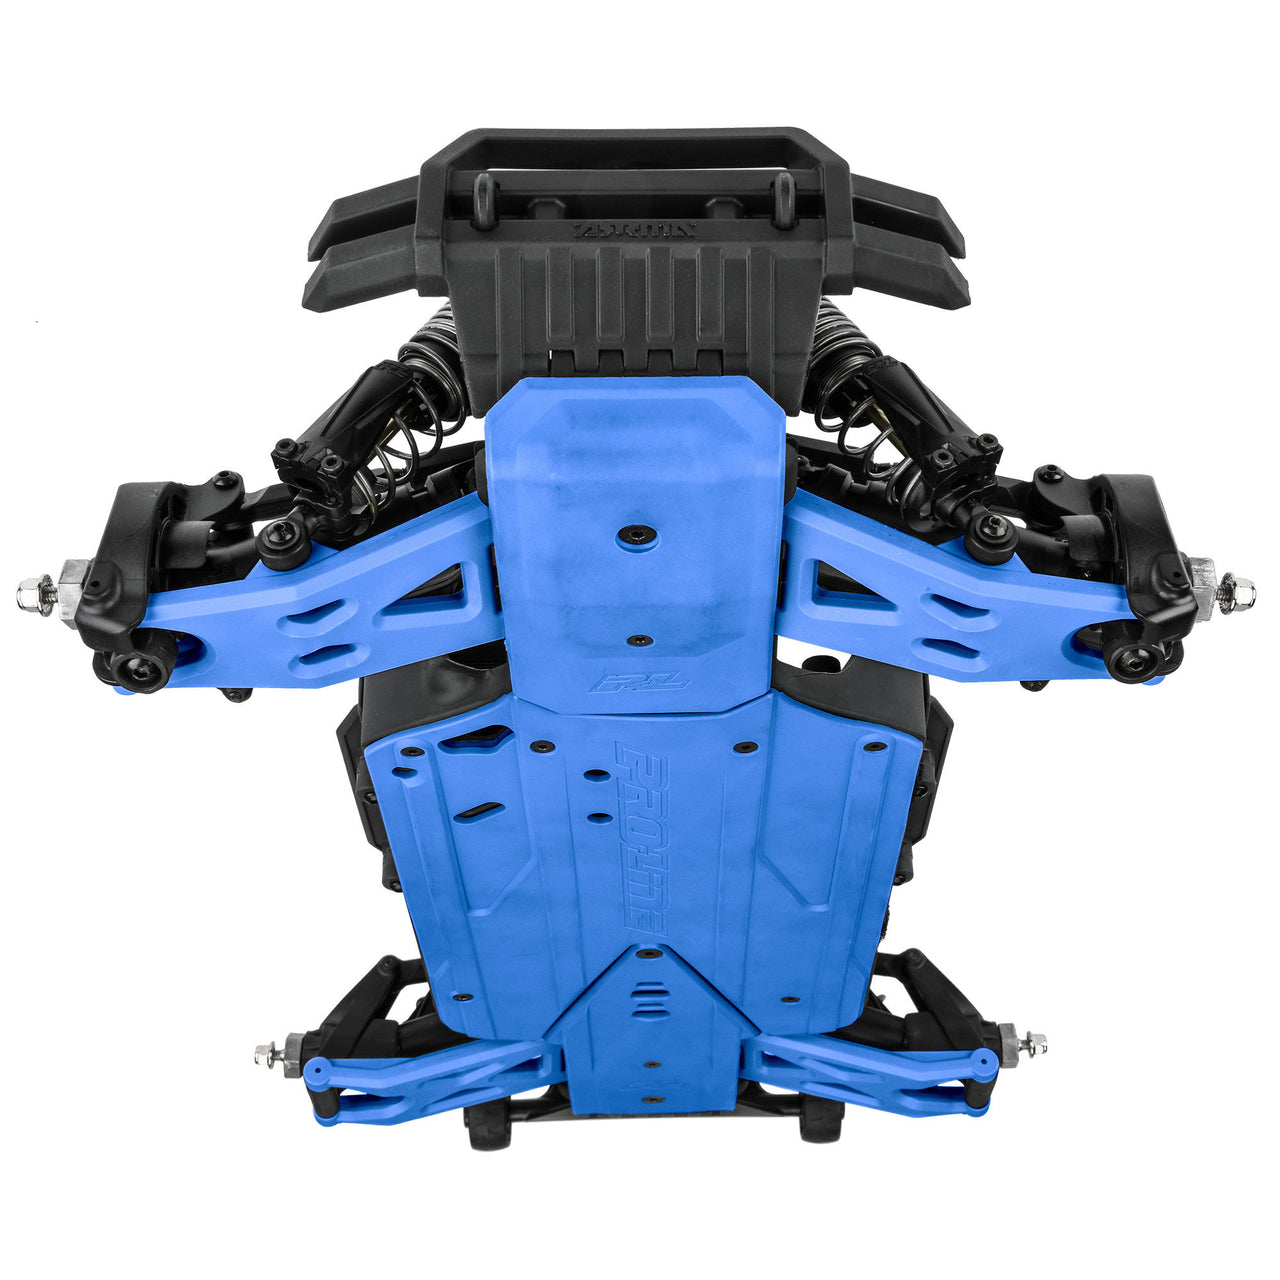 PRO639506 Bash Armor Front/Rear Skid Plates (Blue) for ARRMA 3S Vehicles